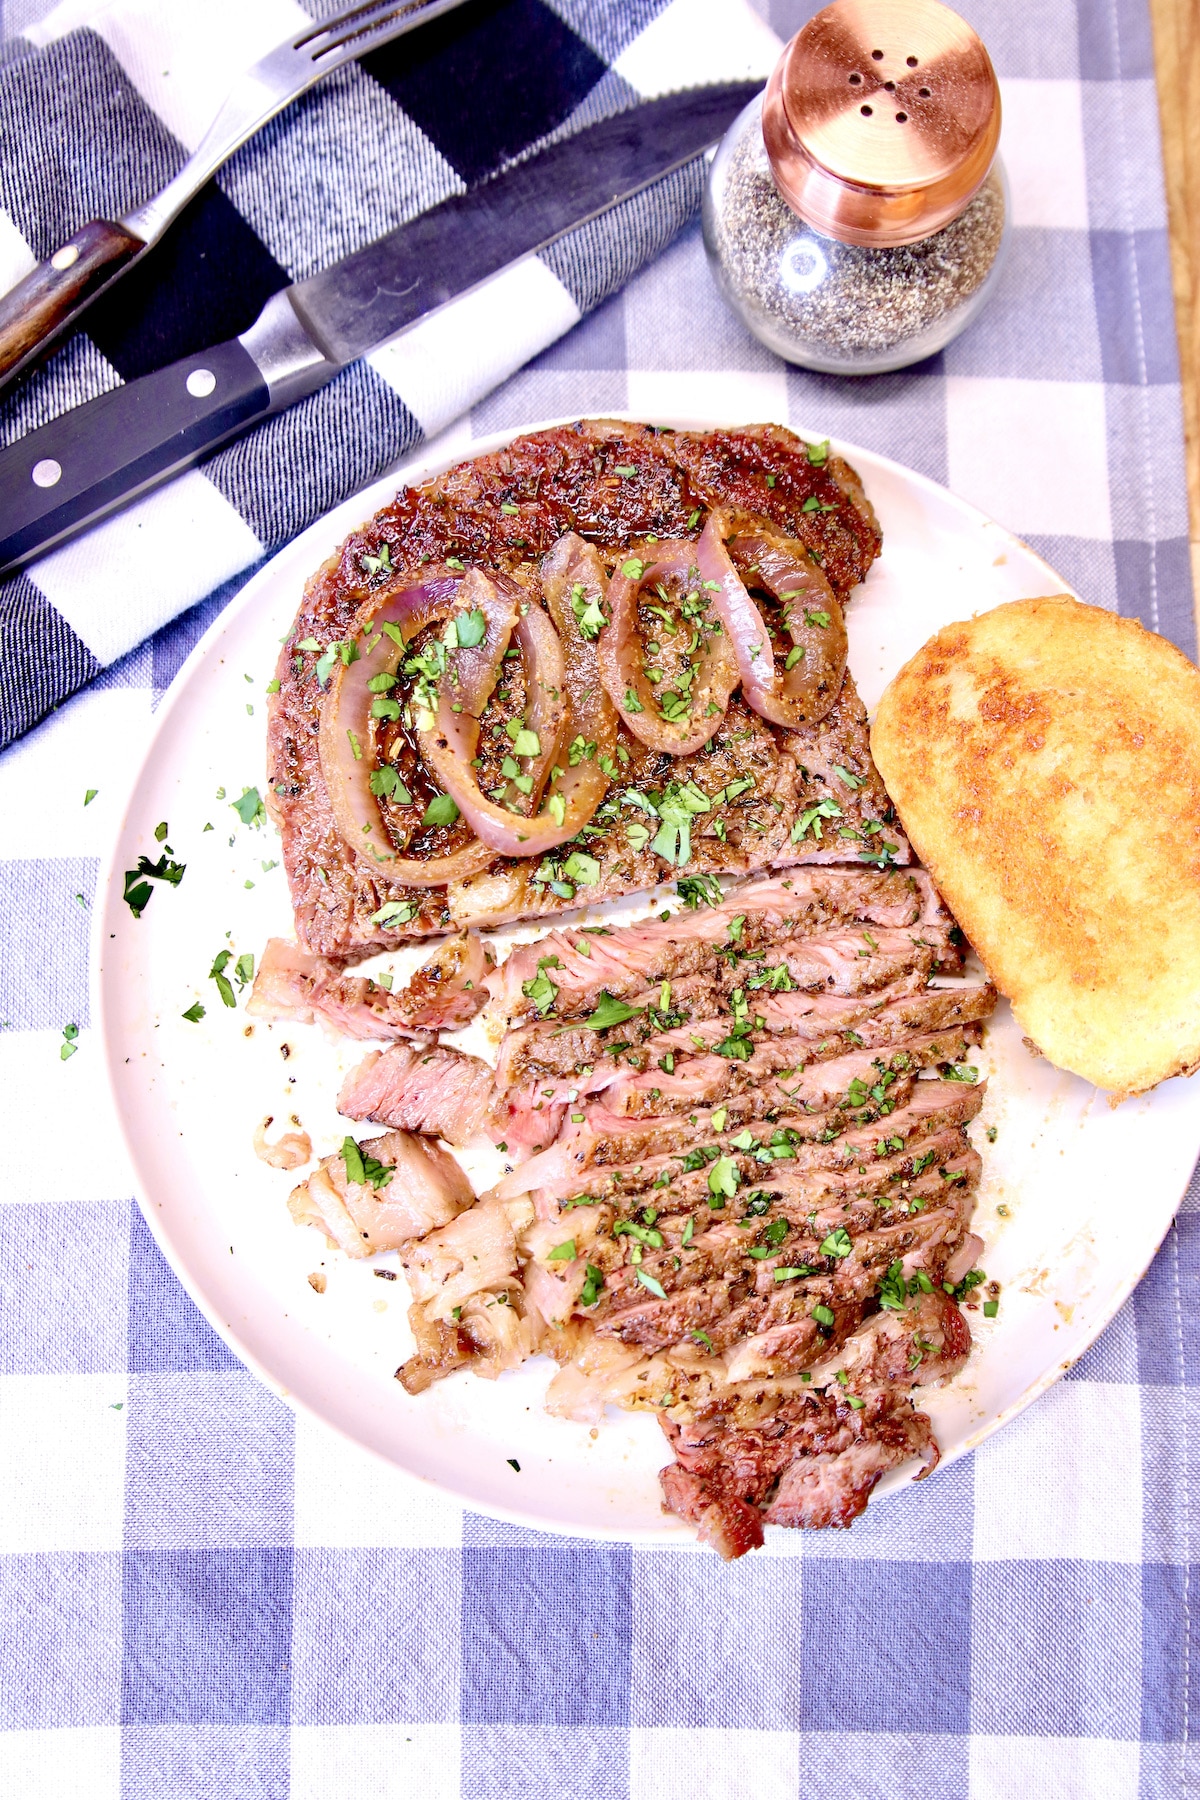 Grilled ribeye steak partially sliced with onions.